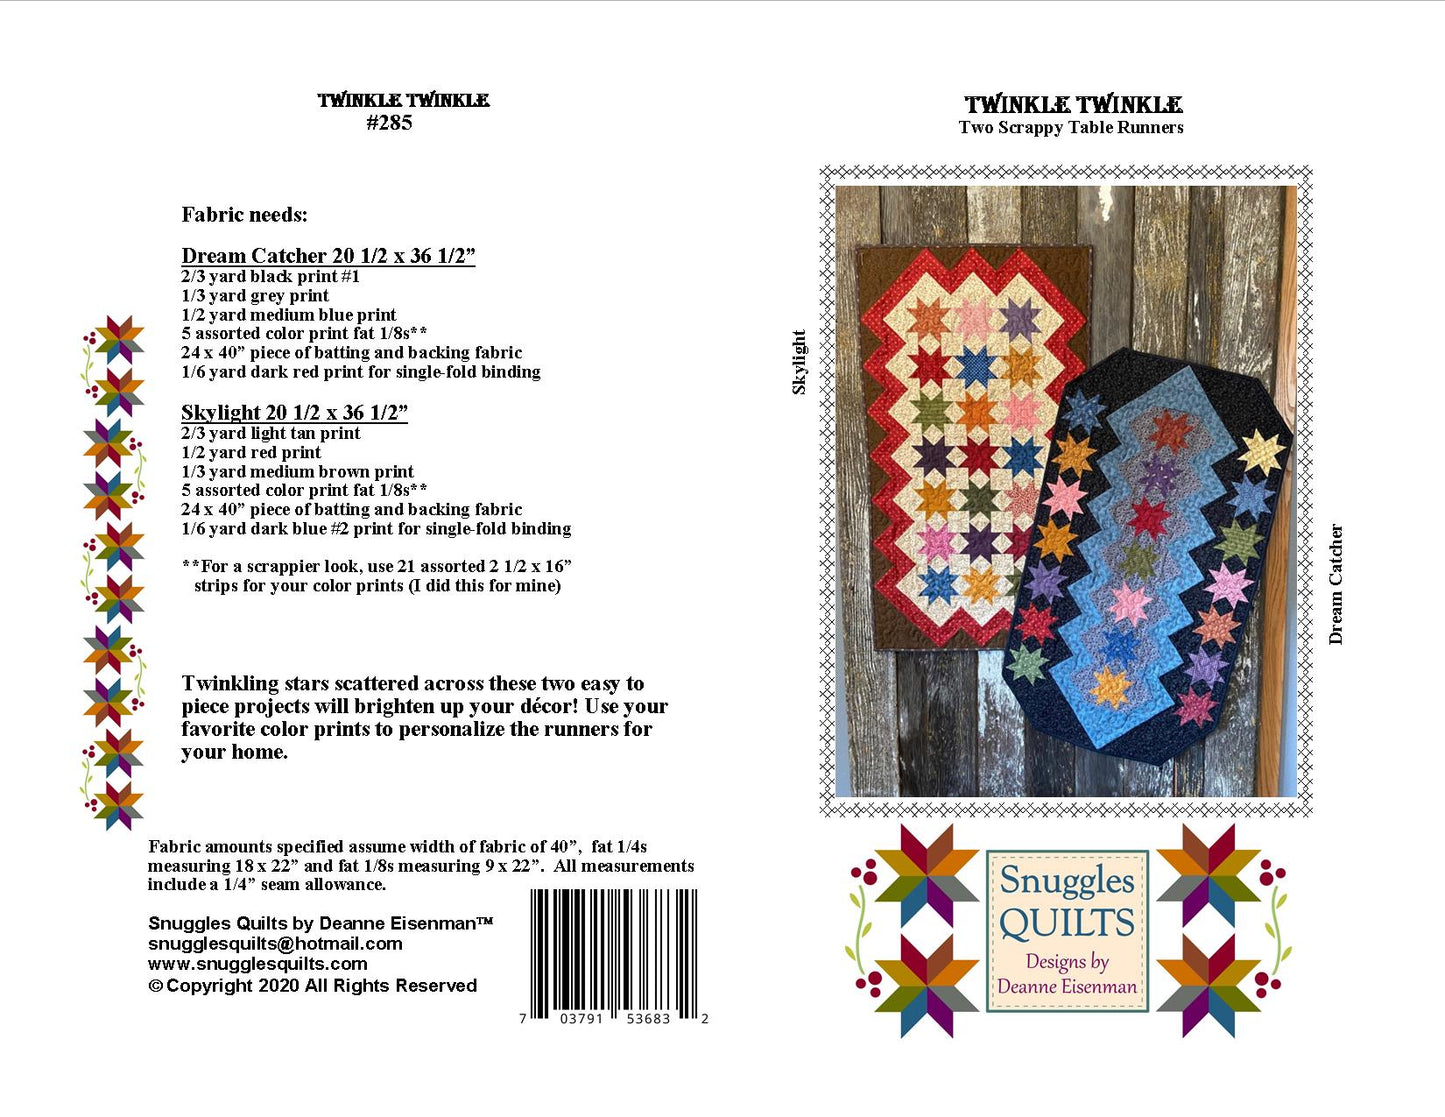 Scrappy table runner quilt pattern designed by Deanne Eisenman for Snuggles Quilts